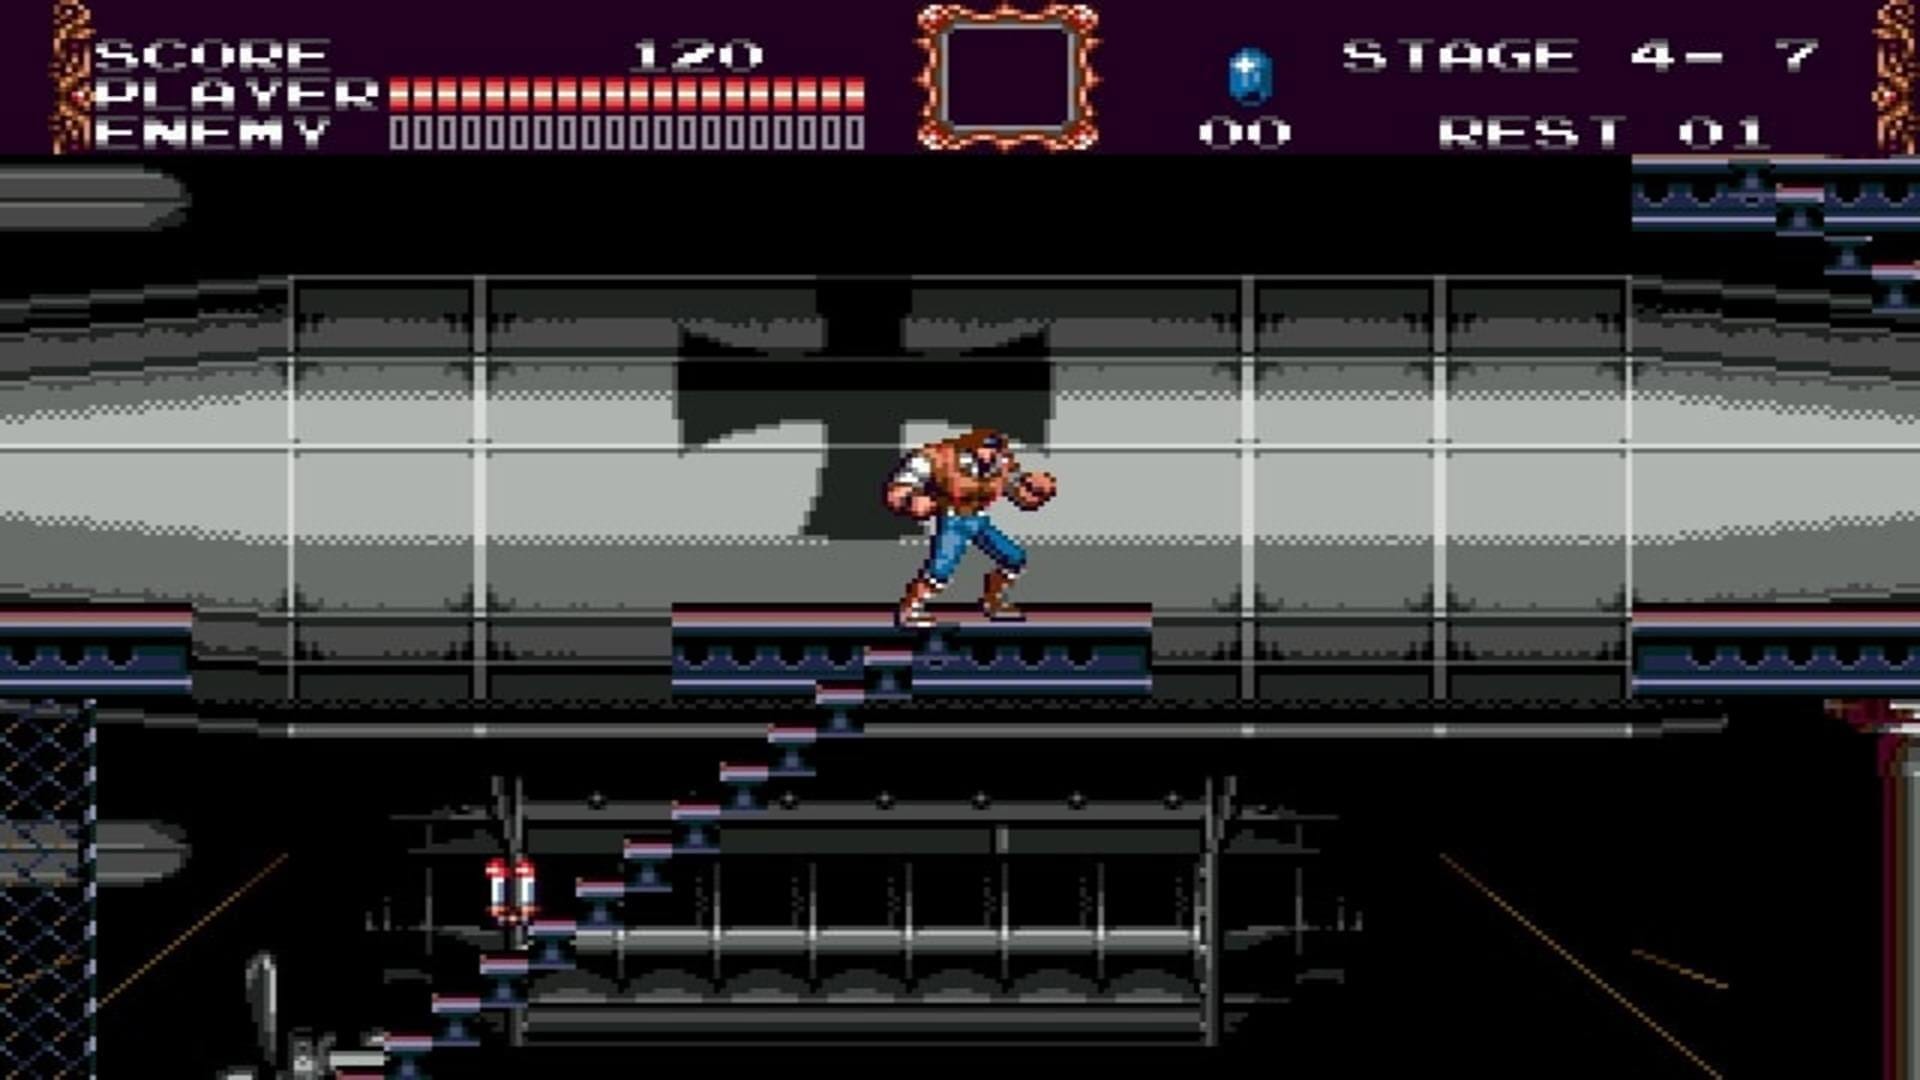 A screenshot of a zeppelin from the Castlevania Bloodlines beta.